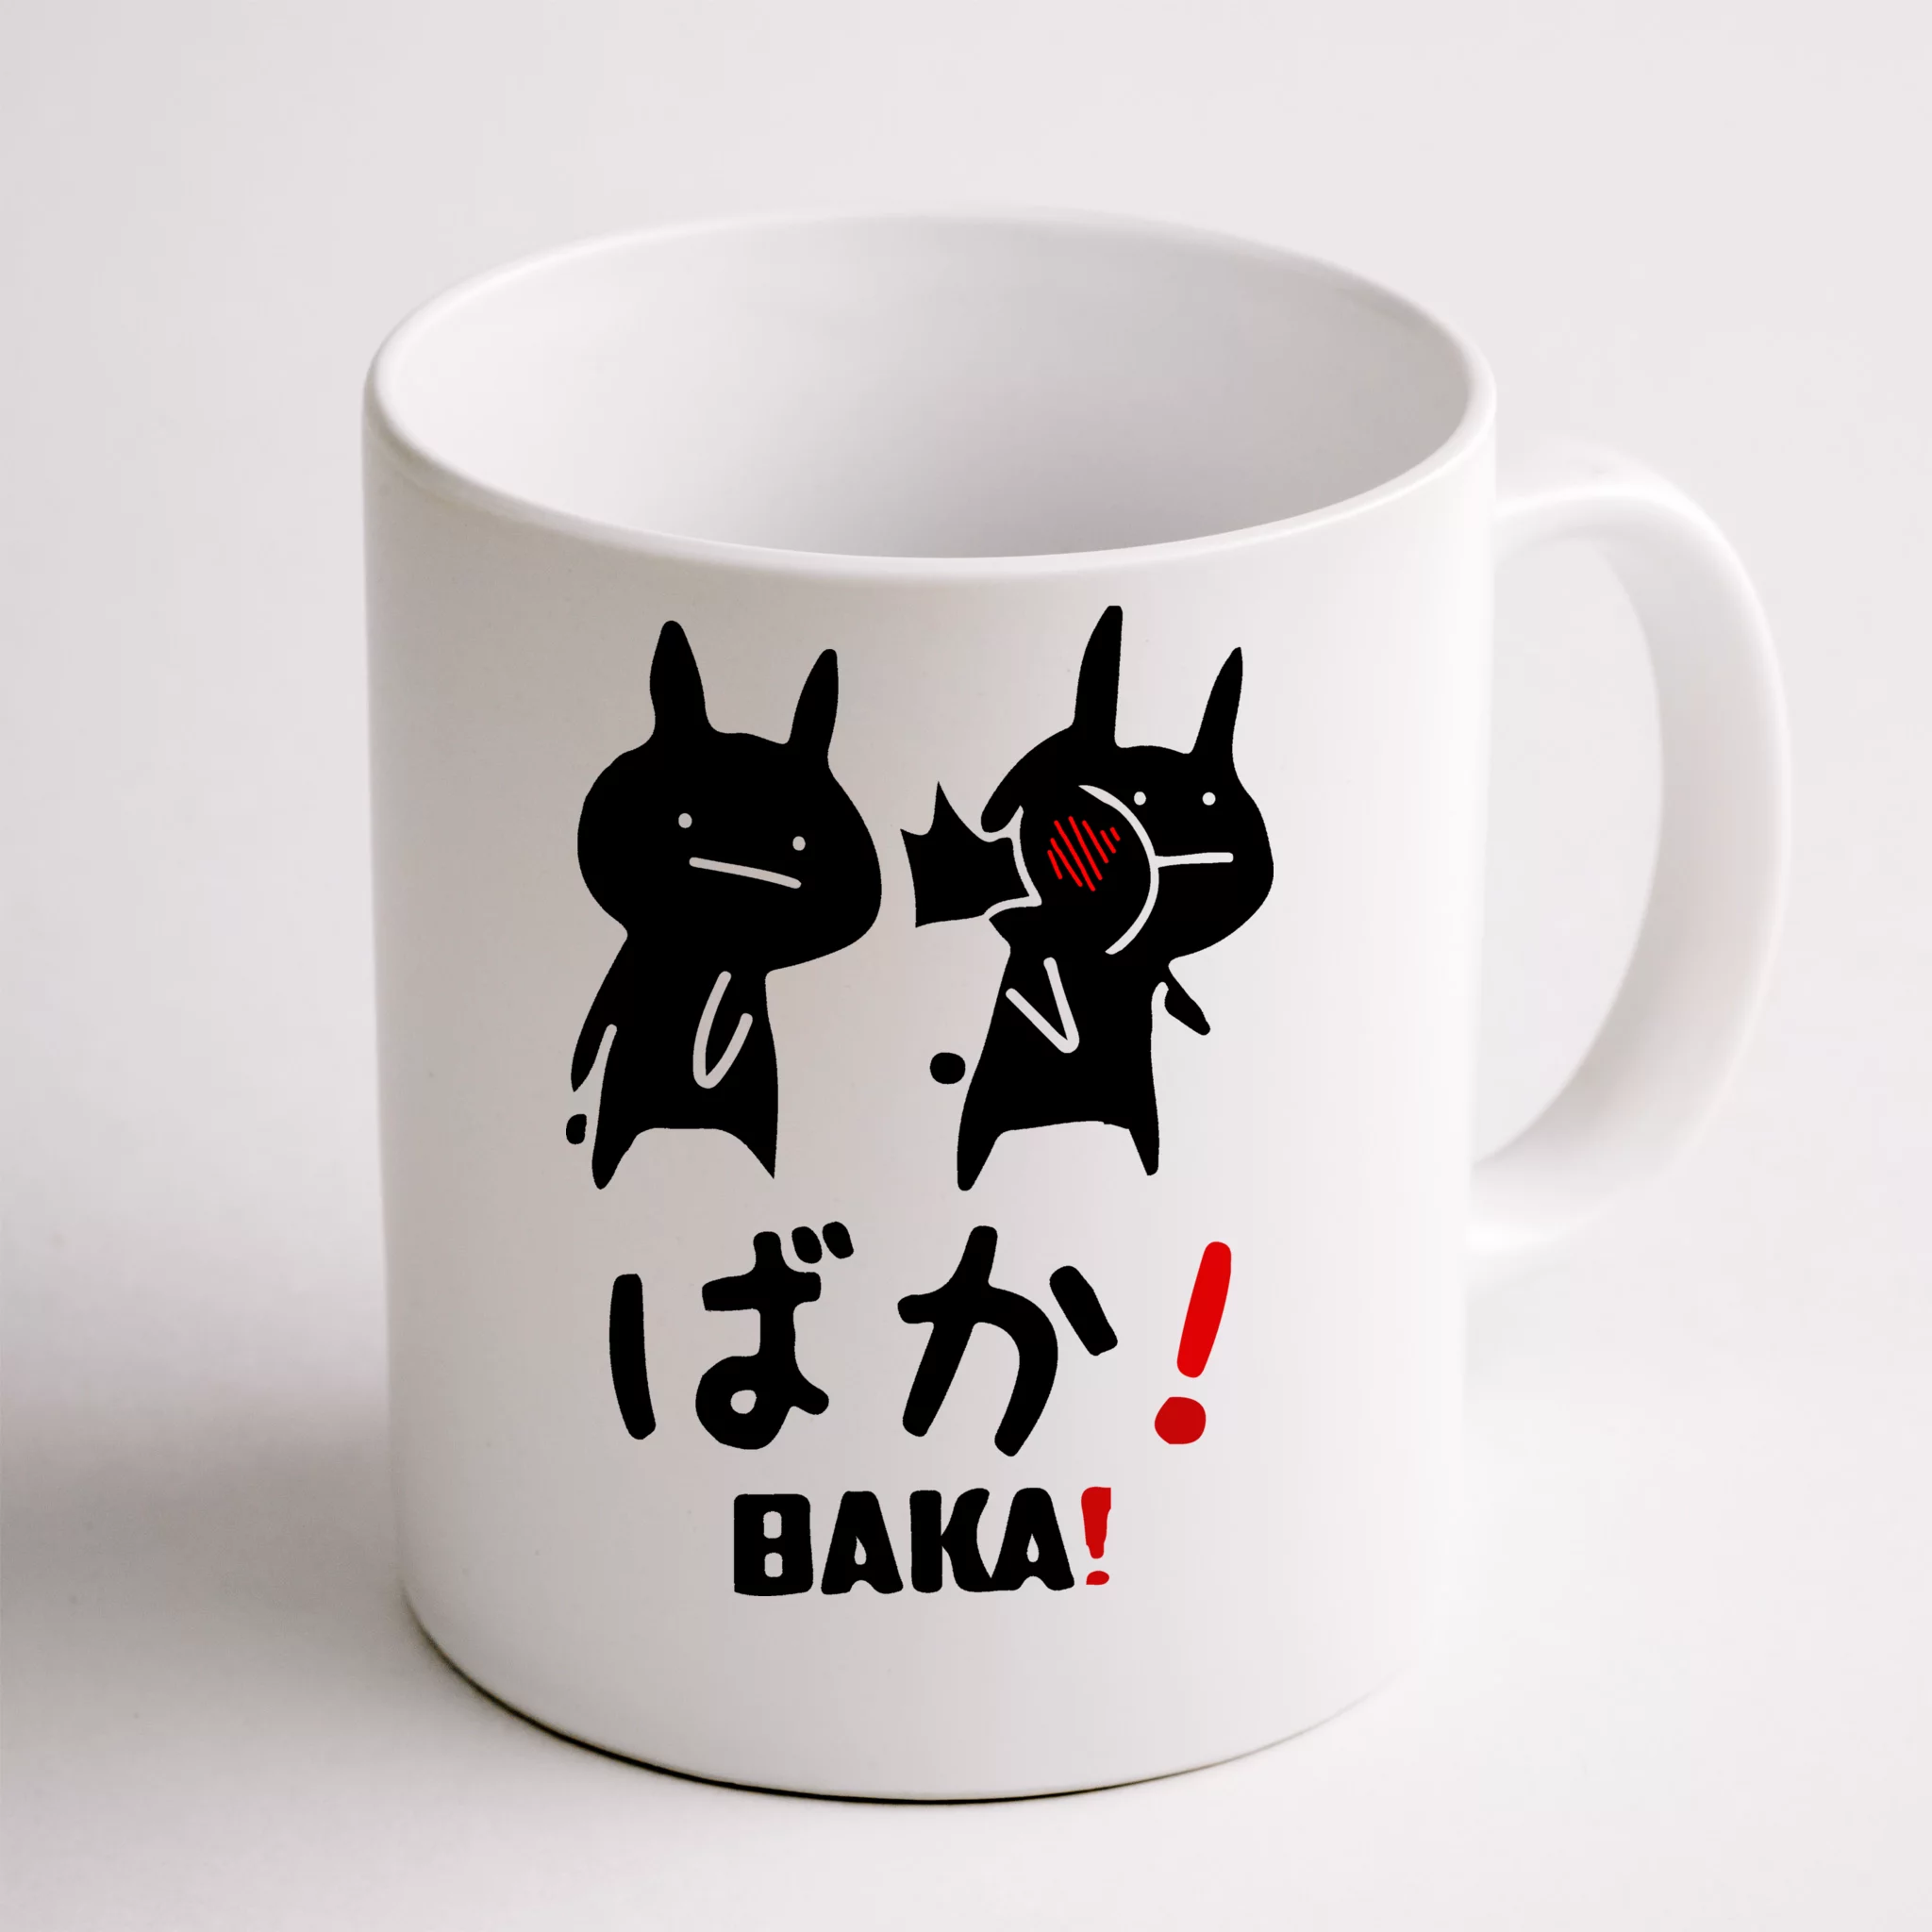 TrendoPrint Anime With Coaster (Plate) Ceramic Coffee Milk Tea Cup (350ml)  Best Gift For Happy Birthday, Anniversary, Friendship Day, Kids, Friends,  Brother, Sister, Boys, Girls, Son, Daughter_(MC-02) Ceramic Coffee Mug  Price in